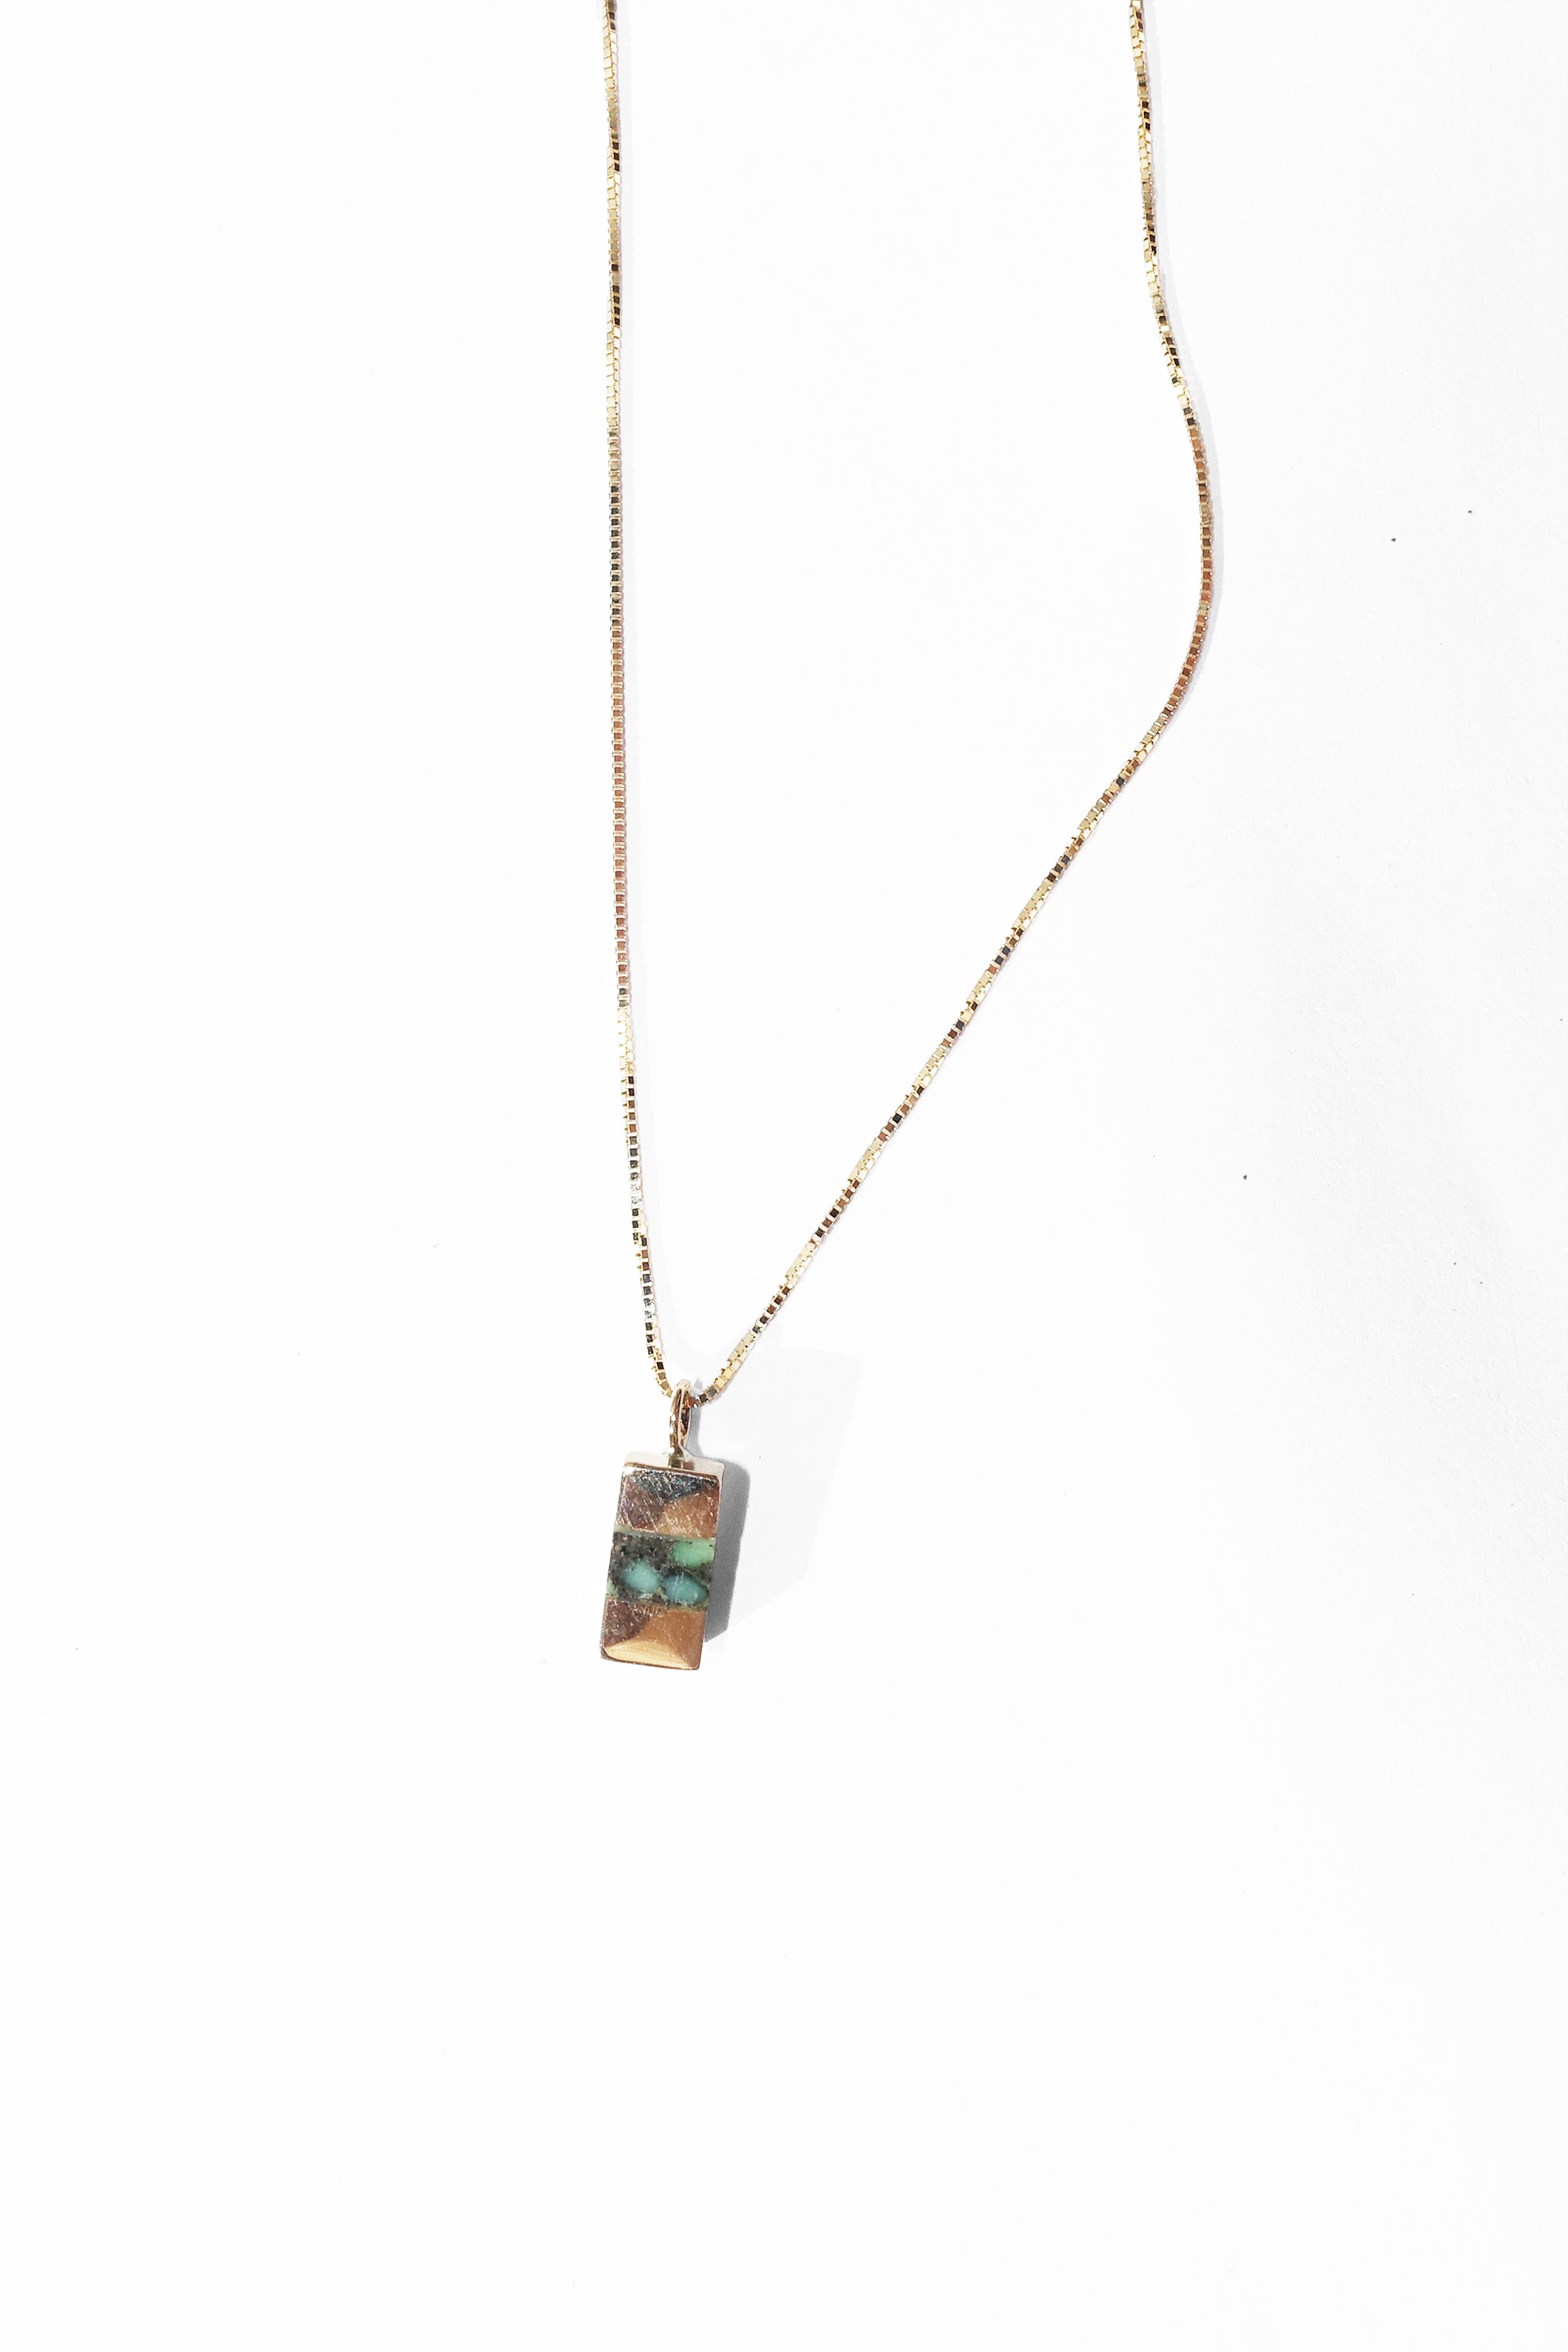 Keel Necklace in Turquoise & 14k Gold